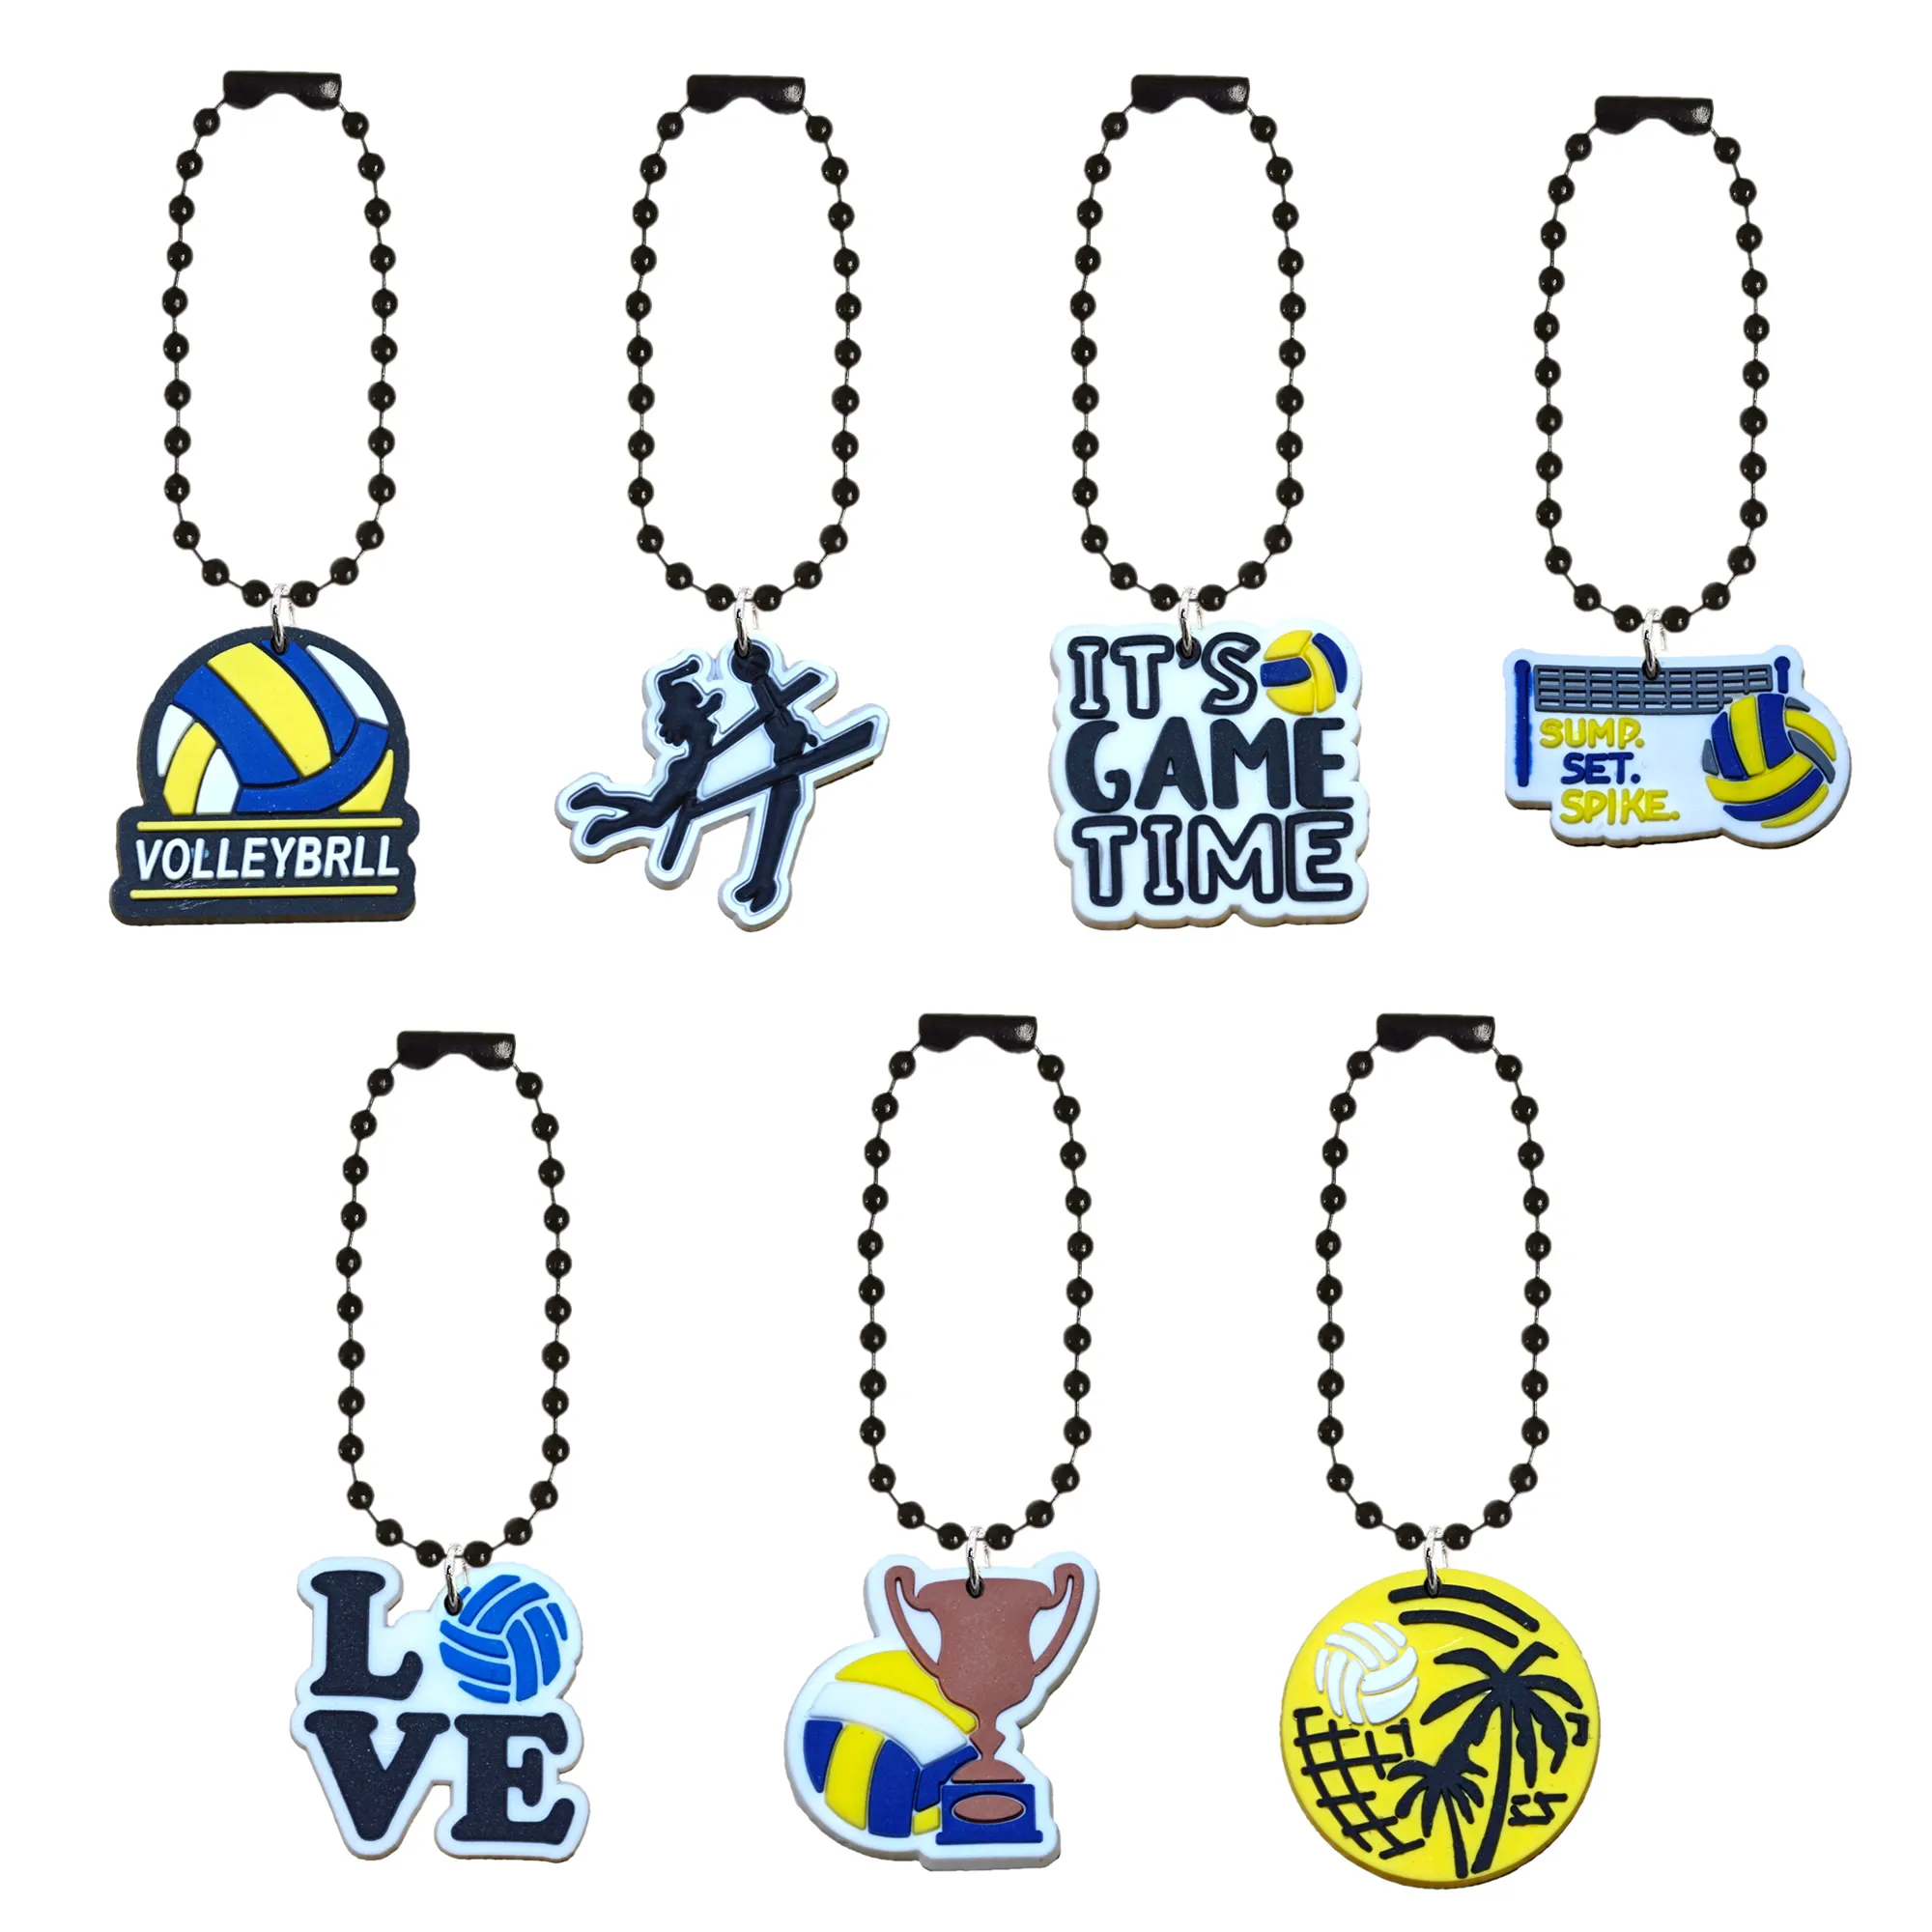 cartoon keychain bead keychains blue charm key ring hanging chain jewelry accessories for bags girls bracelet shoes